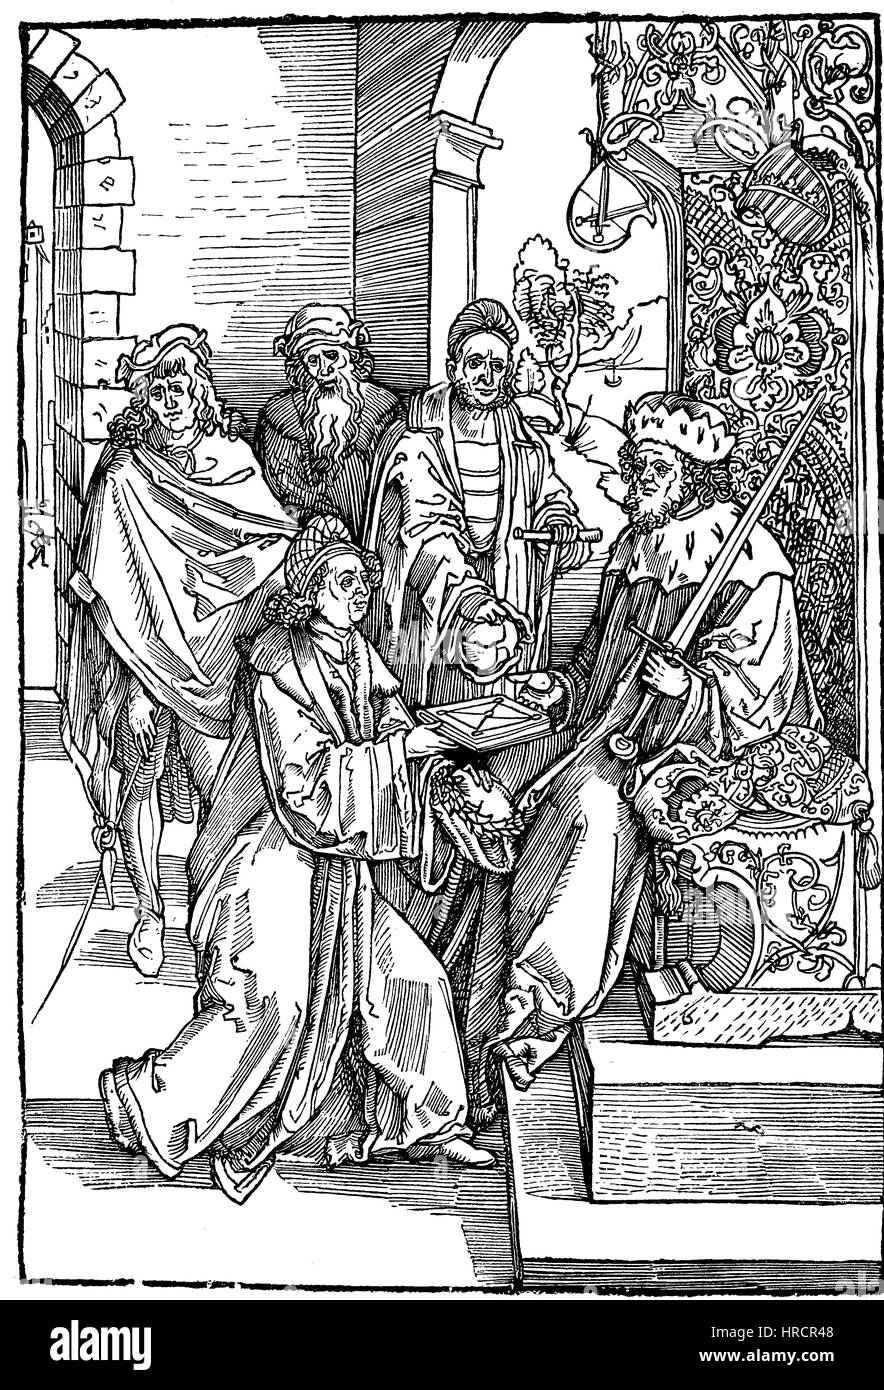 Conrad Celtis, Konrad Celtes, Protucius, hands over Emperor Friedrich III. his works, facsimile of the woodcut of Albrecht Duerer, printed in Nuremberg, 1501, Germany, cover picture in, Opera Hrosvite , reproduction of an woodcut from the 19th century, 1885 Stock Photo